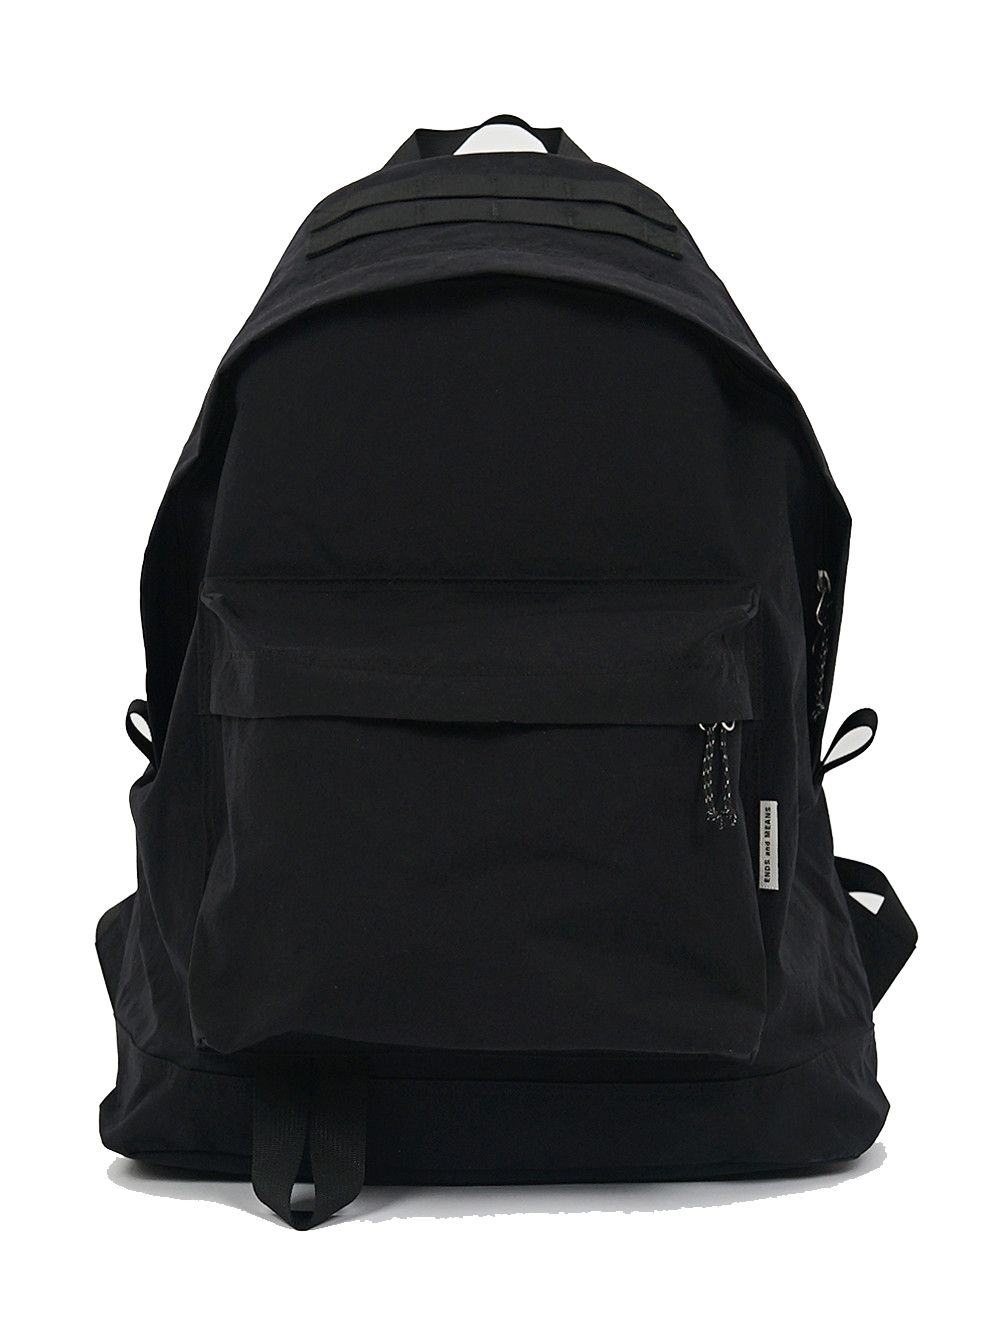 Very Goods | ENDS and MEANS Daytrip Backpack SHD | DOCKLANDS Store